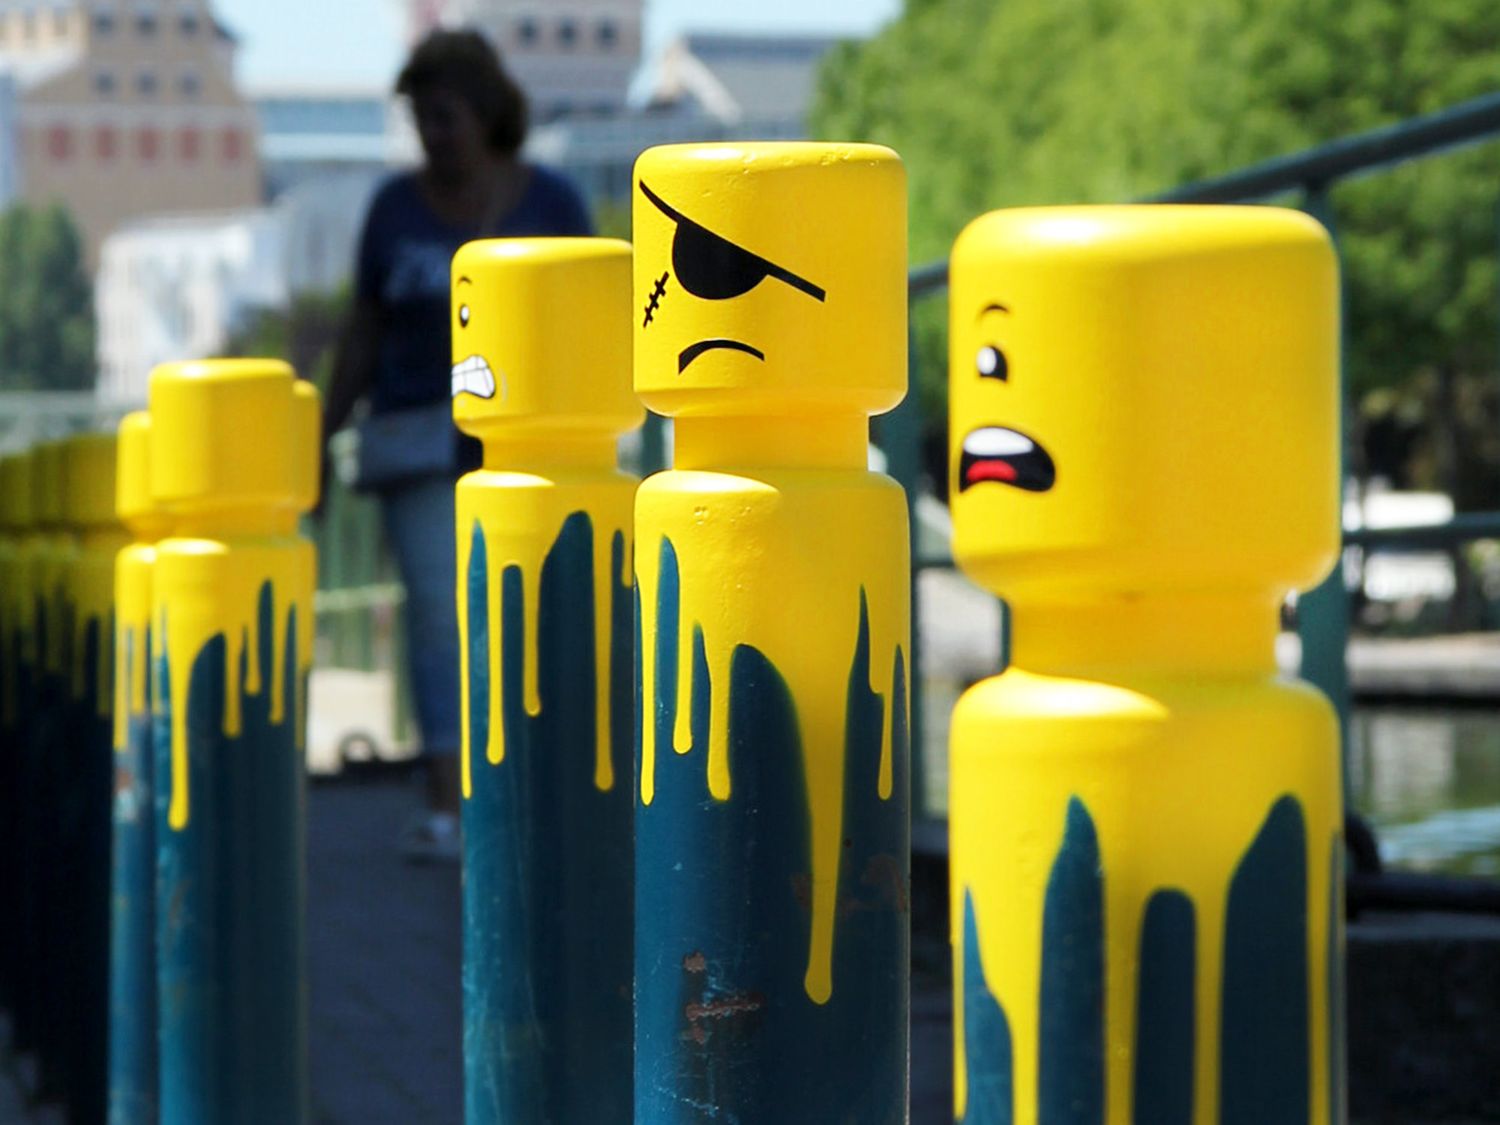 The street bollards of the Ourcq canal quickly gave way to the imagination of Le CyKlop, which affixed dozens of heads of its character L'éGO, derived from the famous Danish brand.